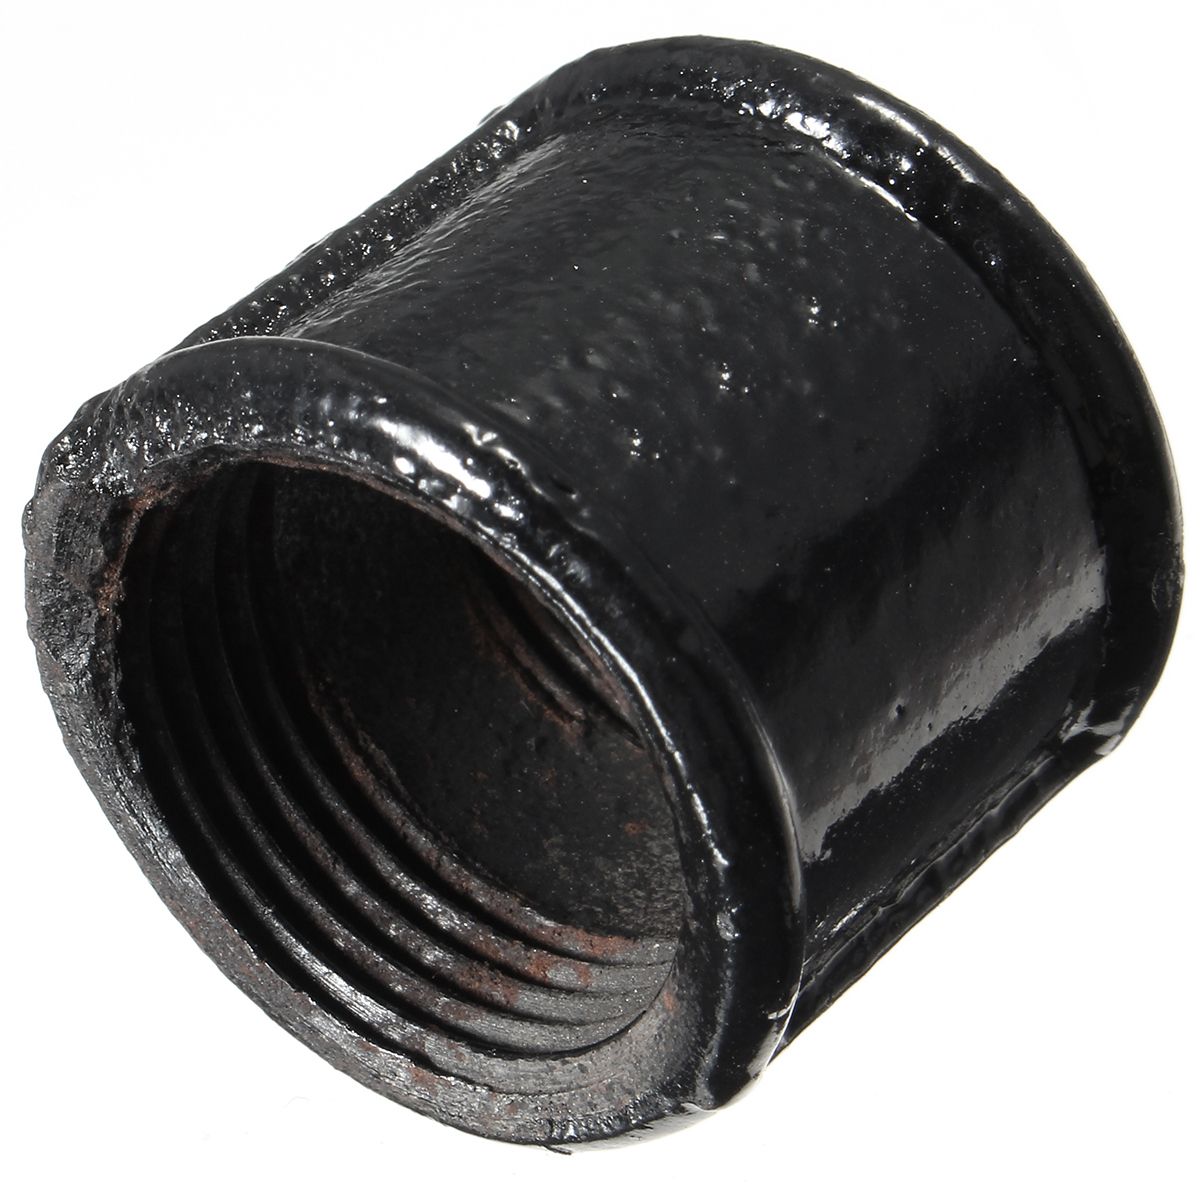 34-Inch-Black-Iron-Pipe-Threaded-Coupling-Fittings-Malleable-Cast-Iron-1173272